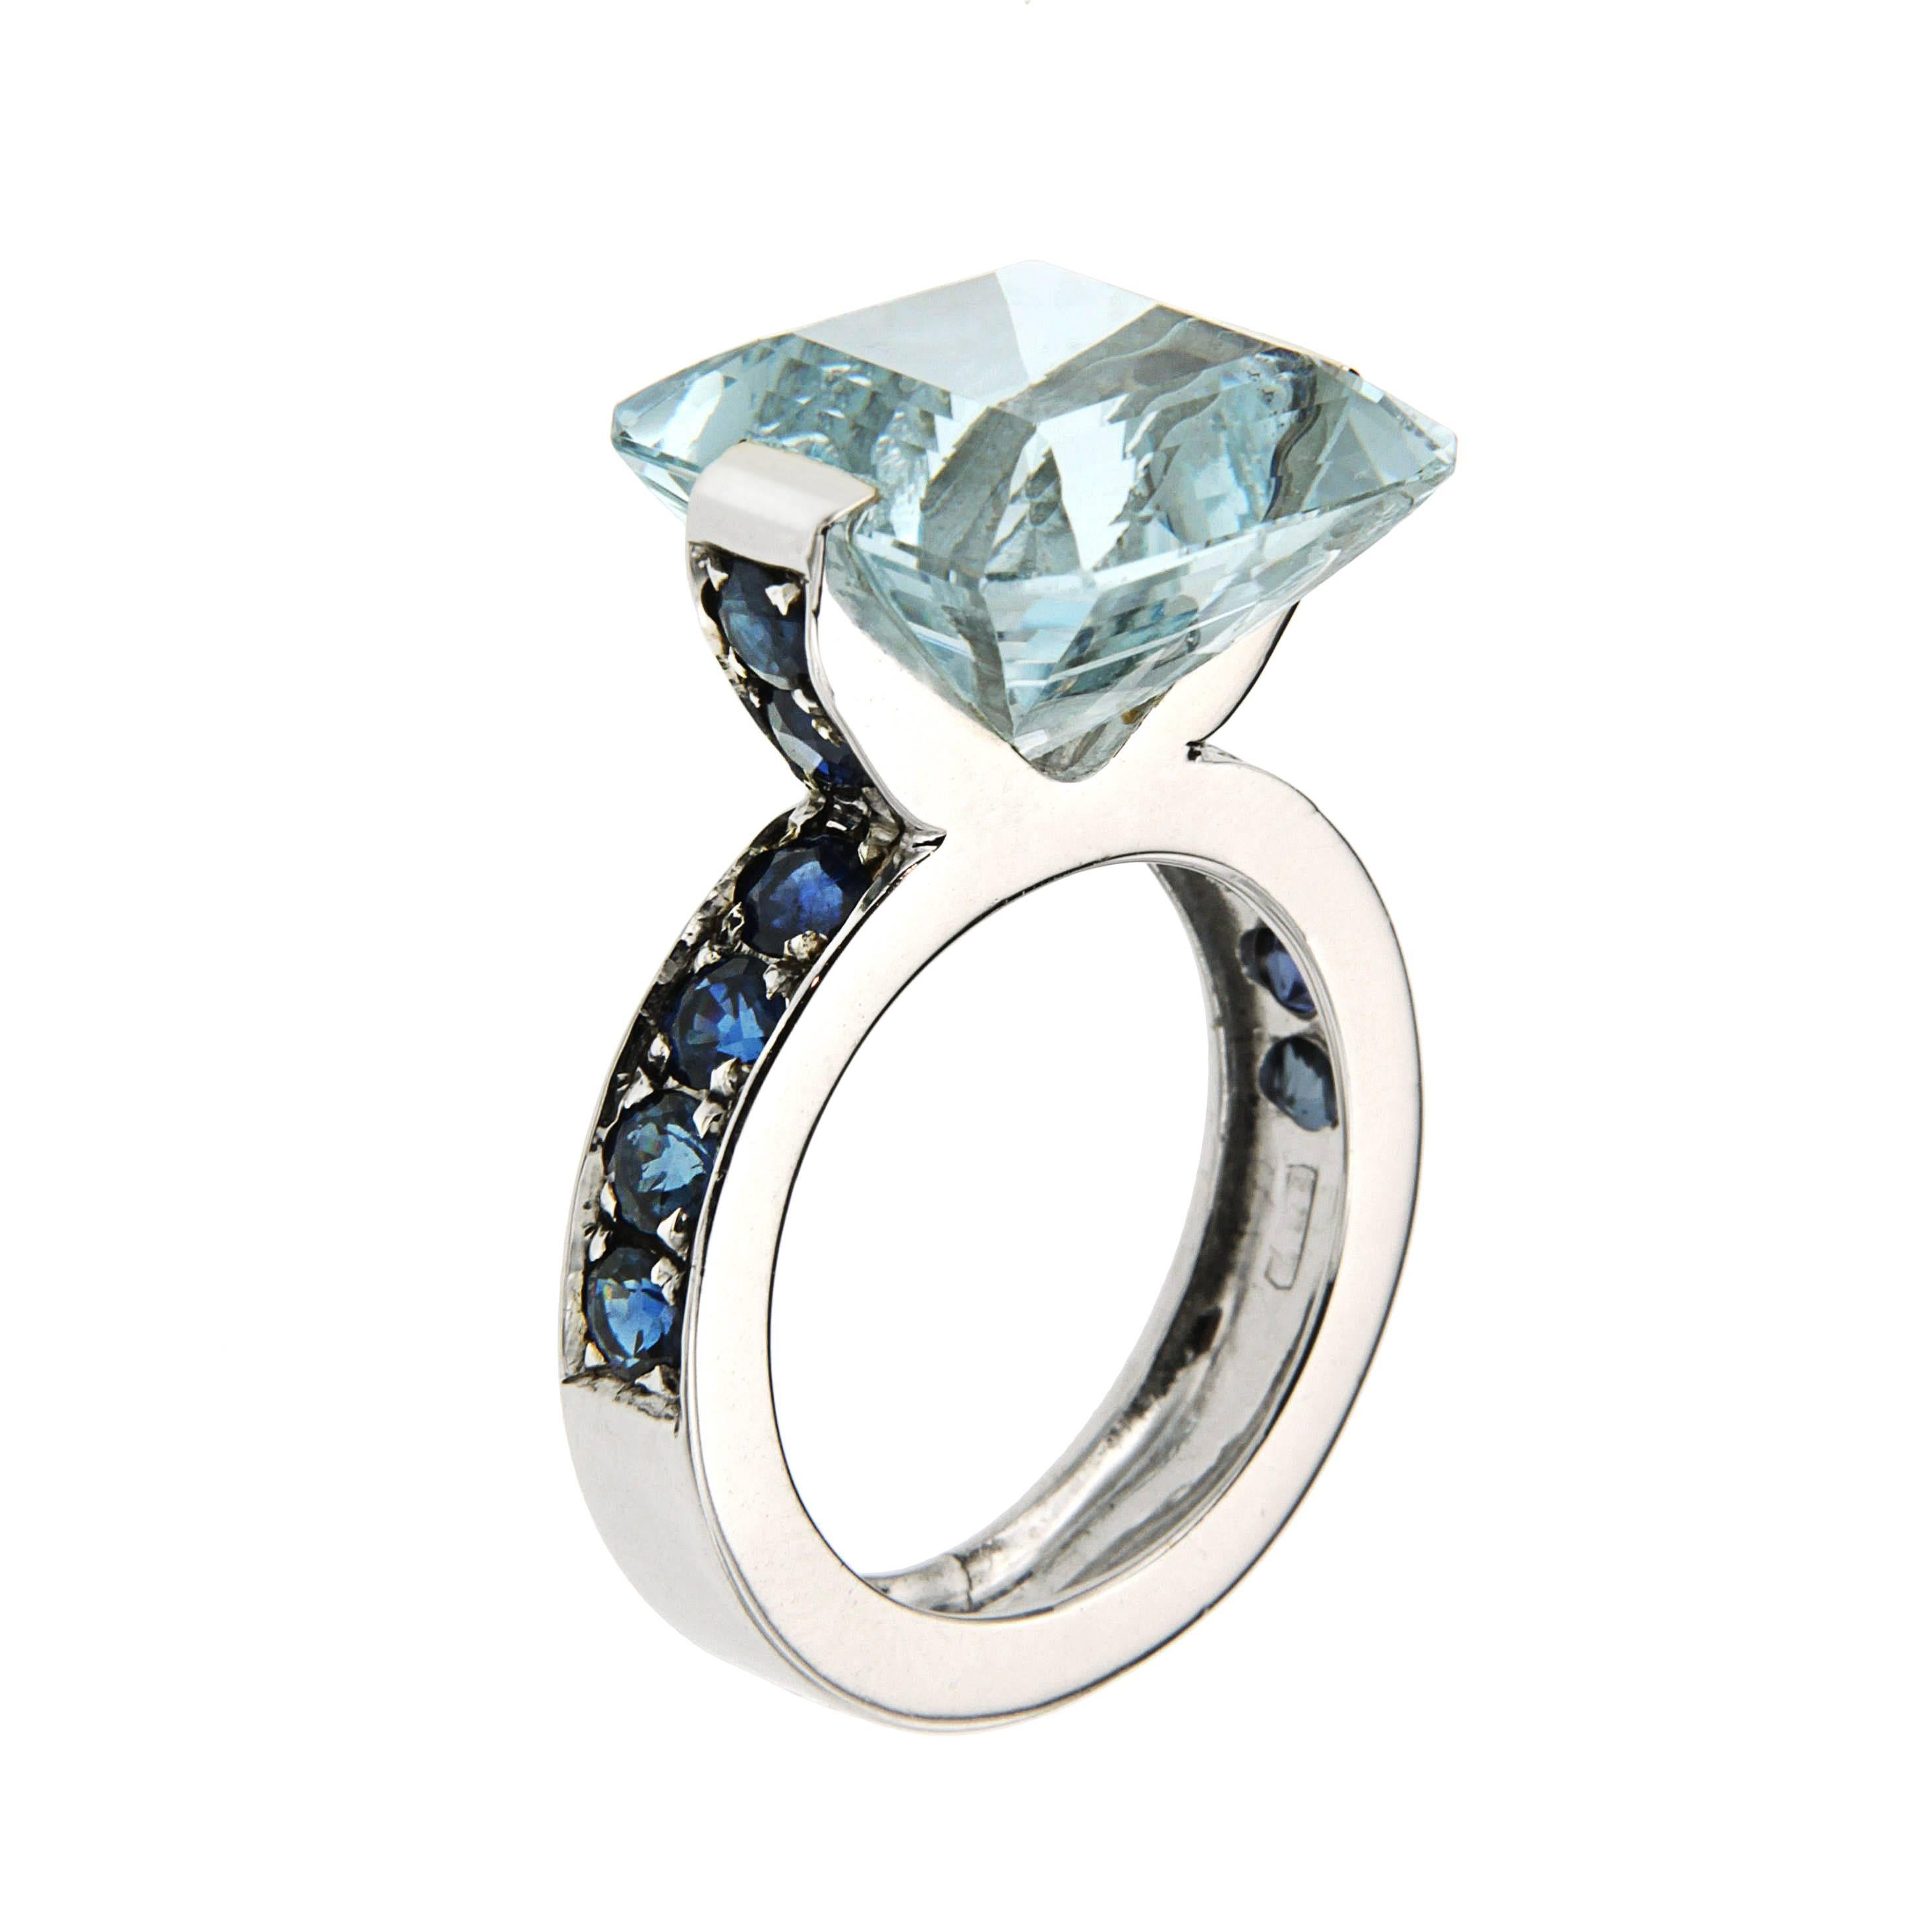 ORIGINAL PRICE 5670,00 euro - NEW PRICE (35% OFF) 3685,00 euro
Modern Design Ring 
White 18kt Gold
Aquamarine 11.90 ctw, 14x14 mm
Blue Sapphires 3.10 ctw
Size 6 1/2, can be sized